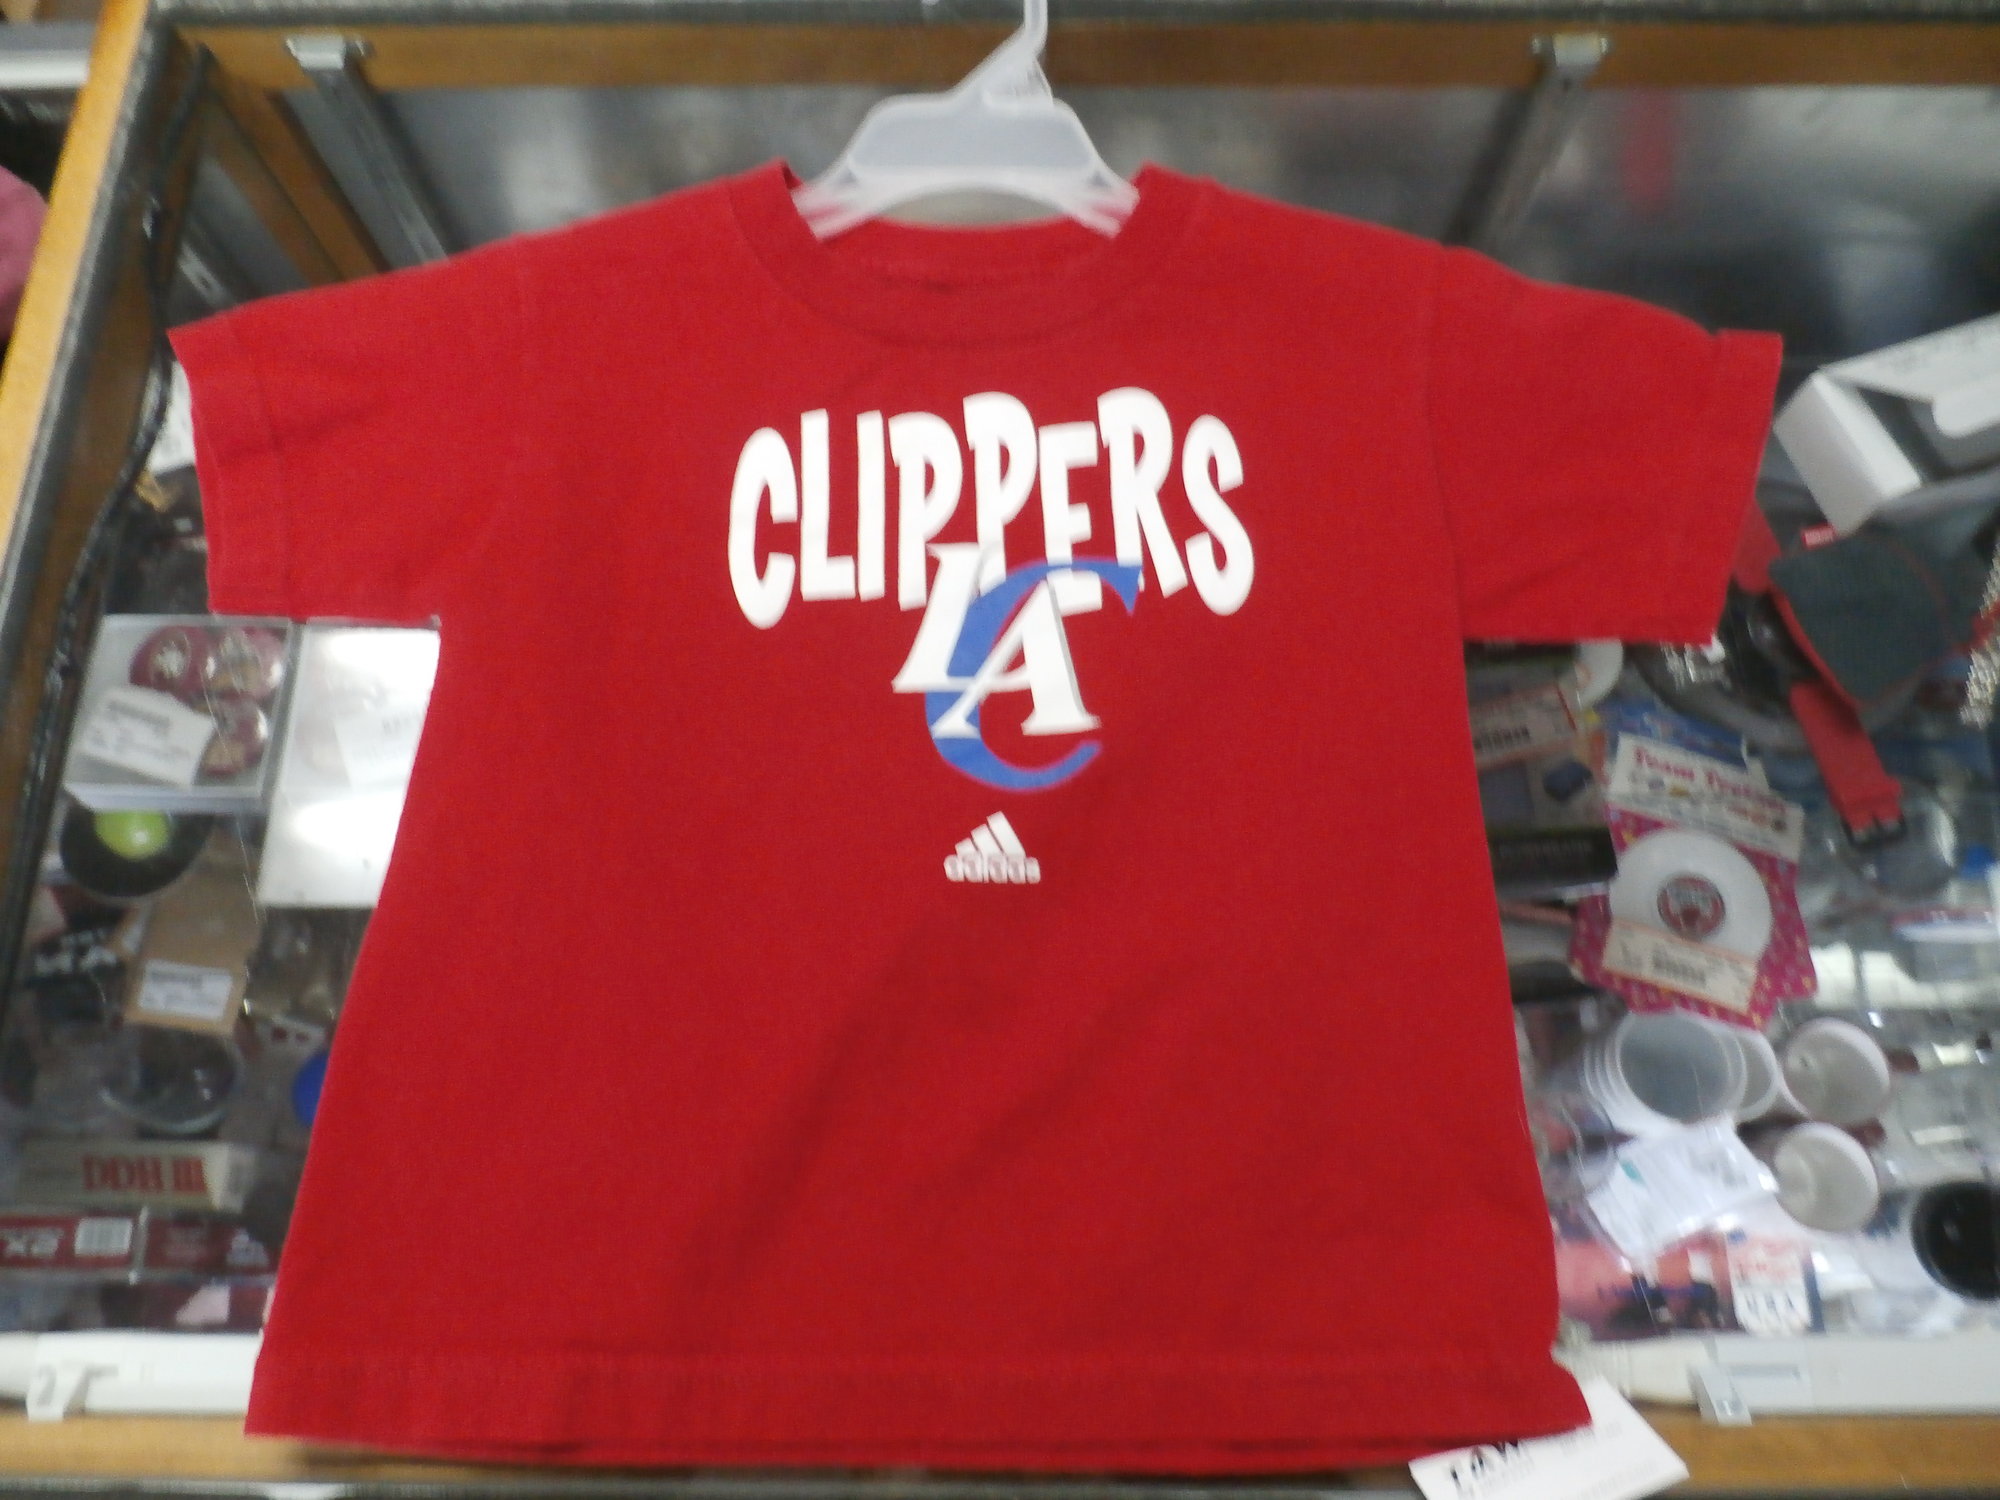 Los Angeles Clippers YOUTH shirt red Adidas size M (5/6) 100% cotton #22807
Rating: (see below) 2- Great Condition
Team: LA Clippers
Player: Team
Brand: Adidas
Size: Boy's Medium 5/6- (Measured Flat: chest 14\", length 17\")
Color: red
Style: short sleeve; screen printed
Material: 100% cotton
Condition: 2- Great Condition; wrinkled; some pilling and fuzz; material is stretched and worn from wearing and washing; some discoloration and fading; no rips or tears; screen printing looks fresh and new; no stains (see photos)
Item #: 22807
Shipping: FREE